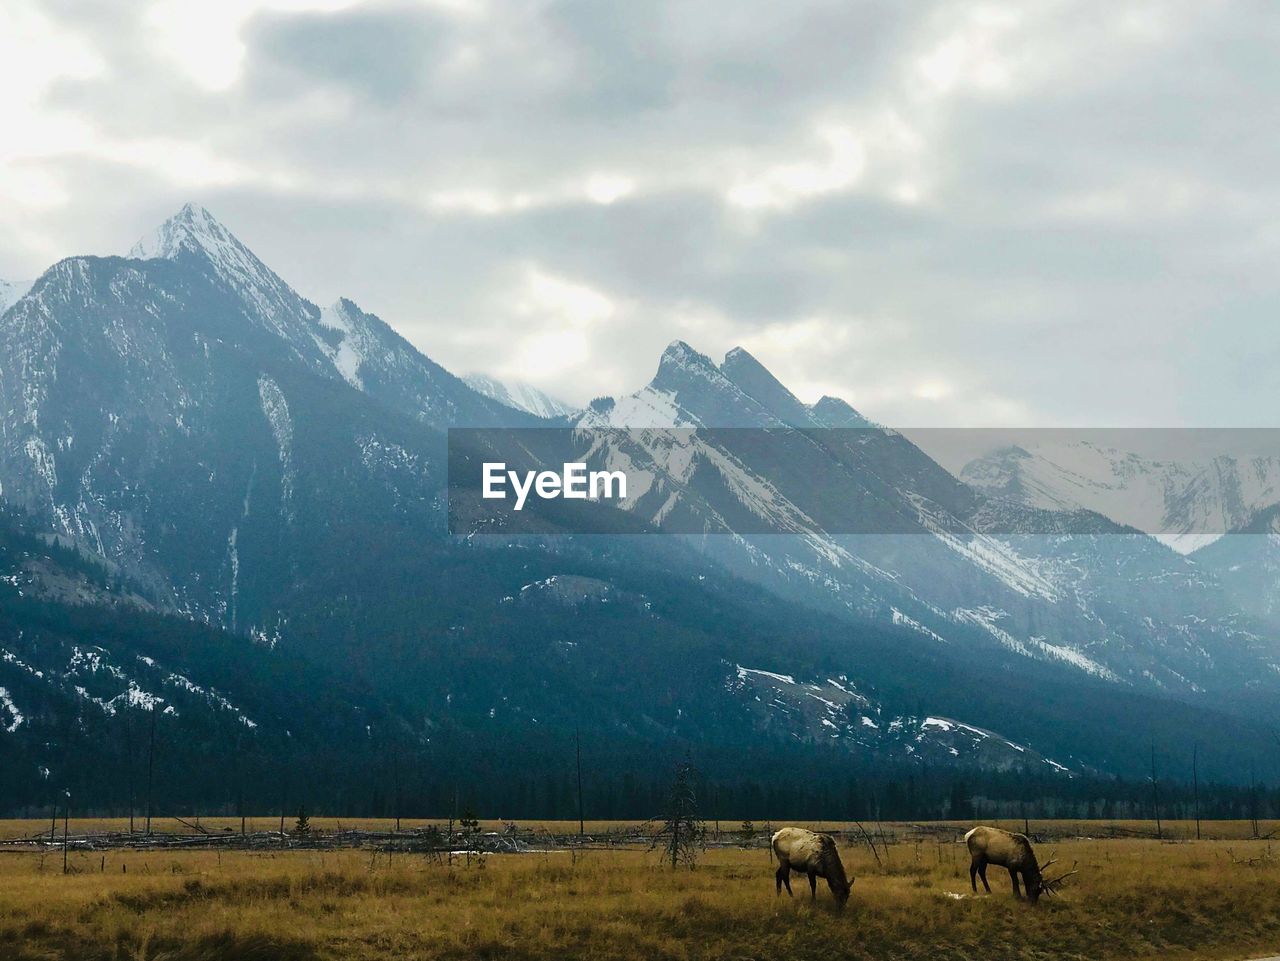 View of horses on field by mountain against sky